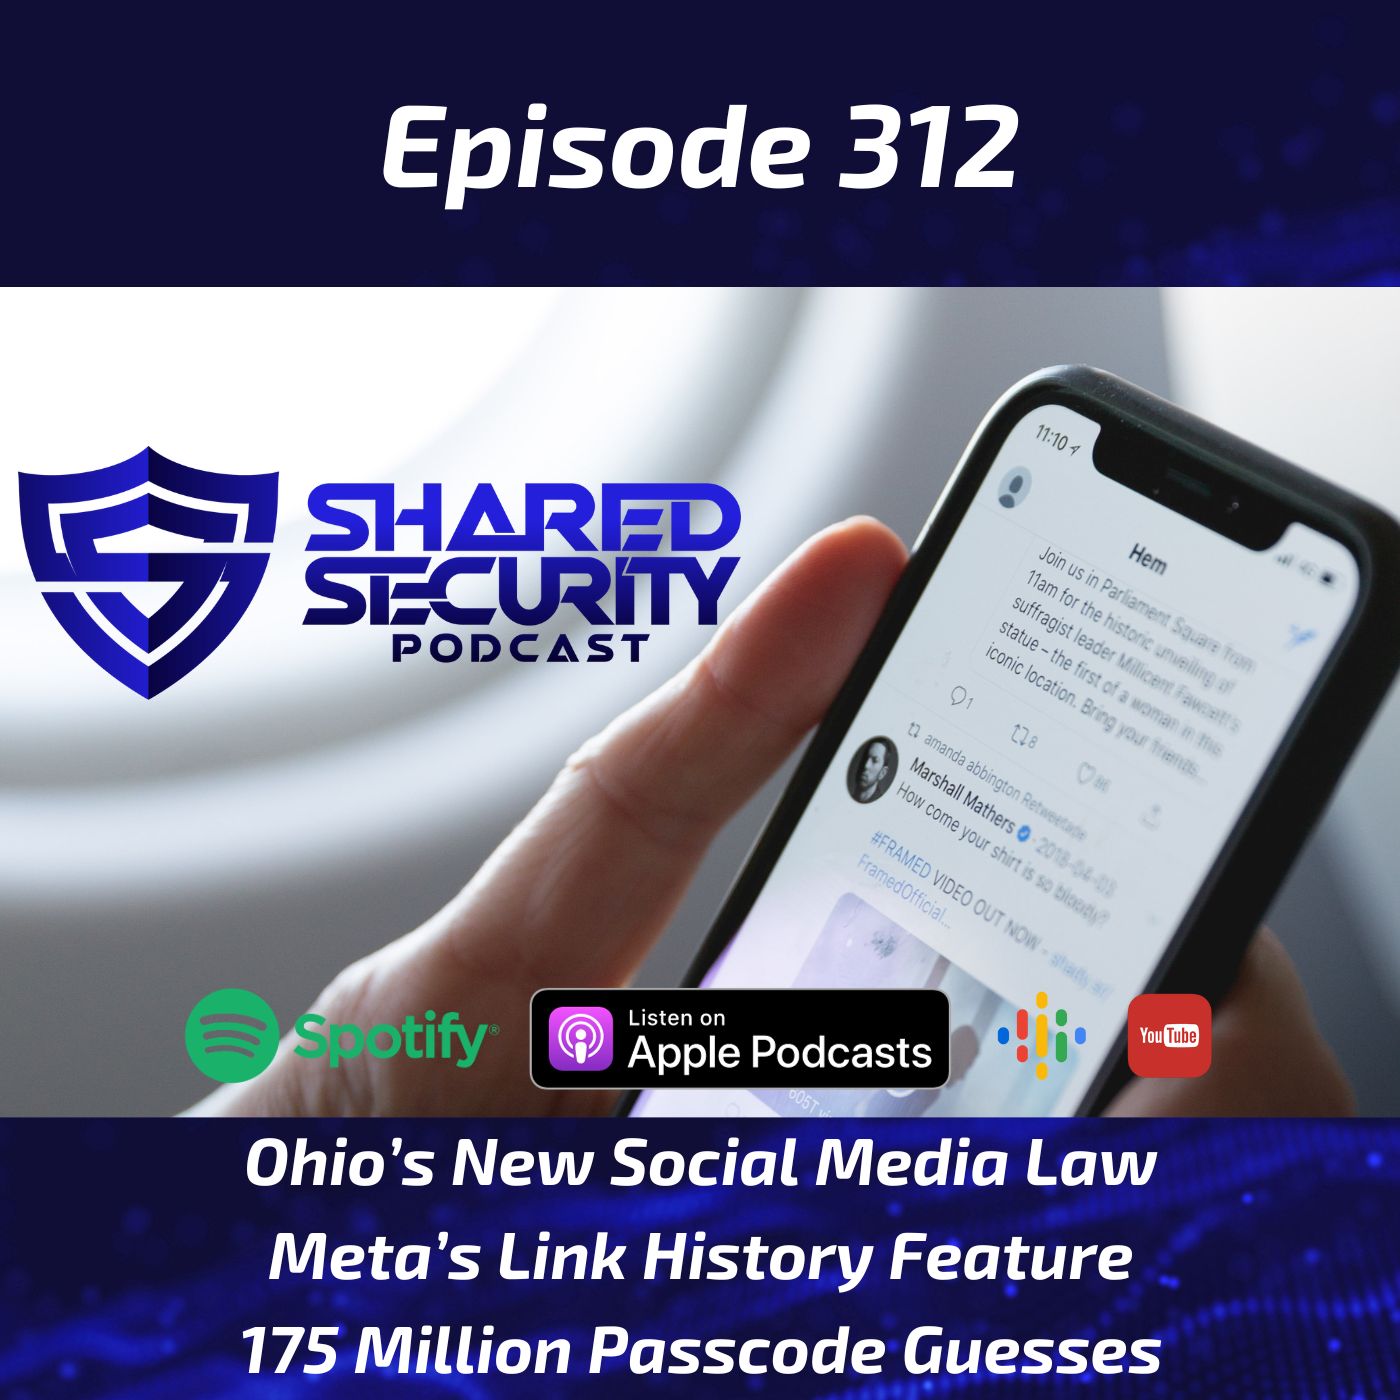 Ohio’s New Social Media Law, Meta’s Link History Feature, 175 Million Passcode Guesses